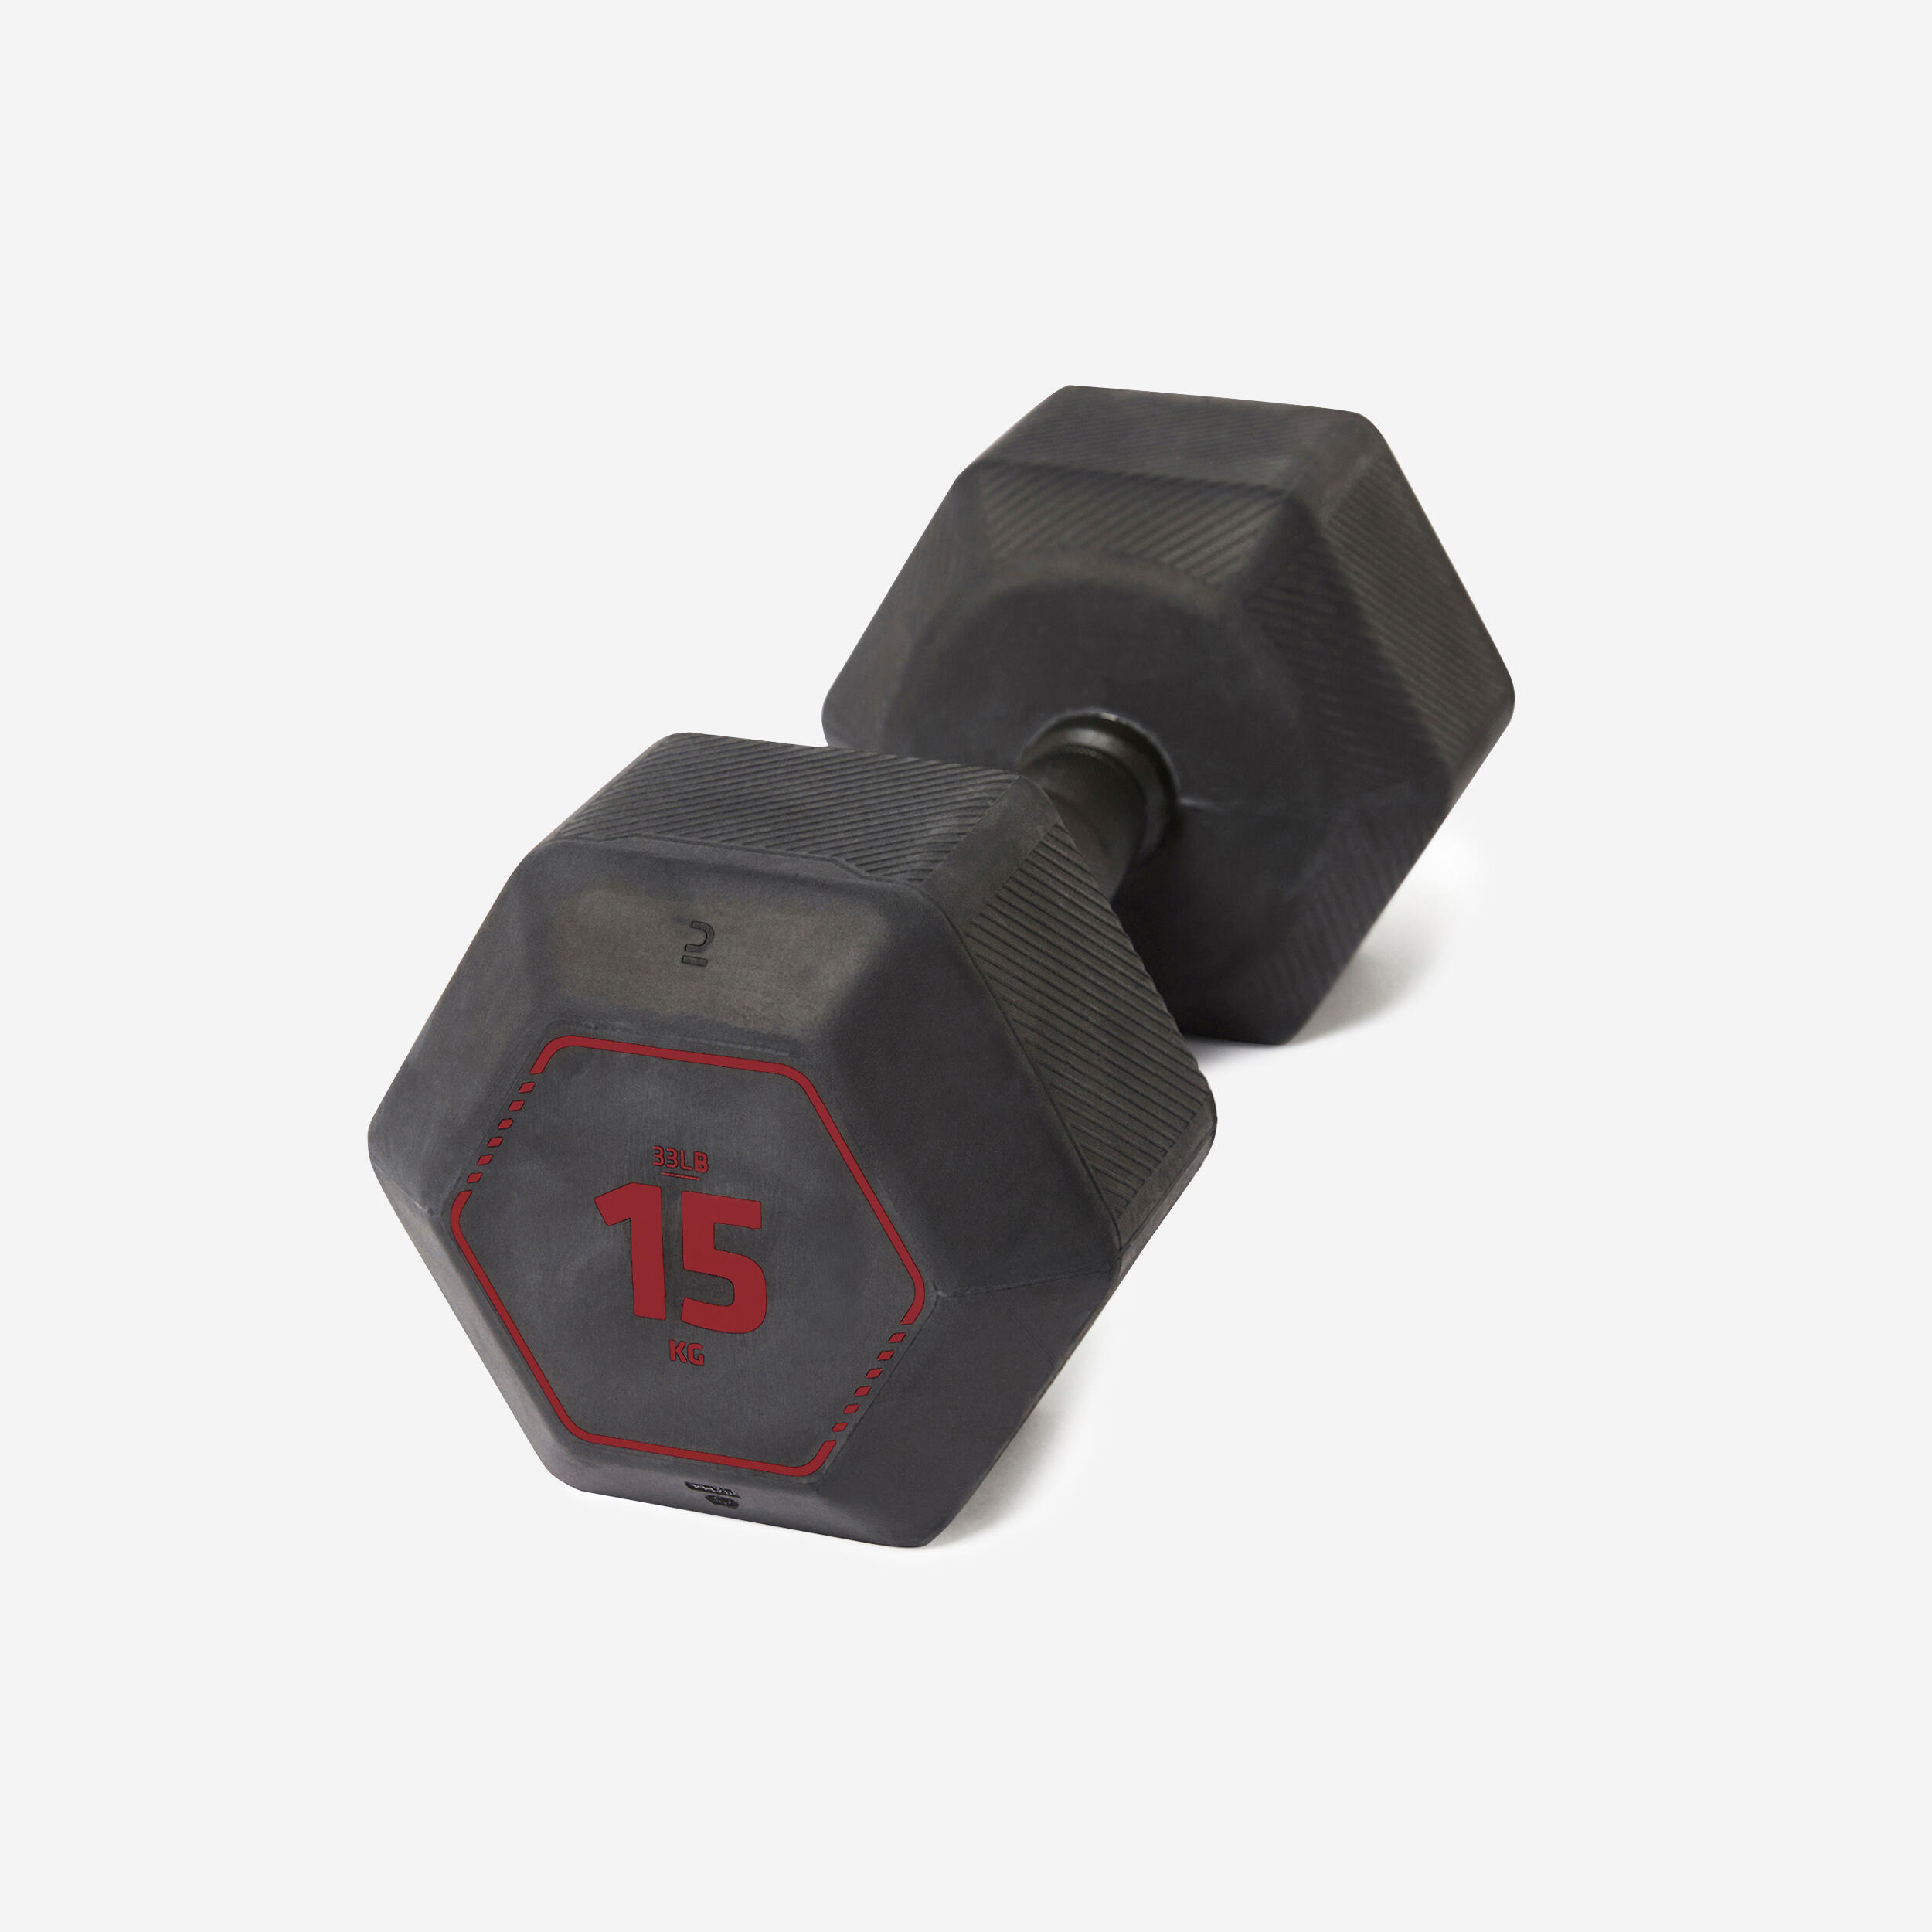 Cross Training and Weight Training Hex Dumbbells 15 kg - Black 1/3